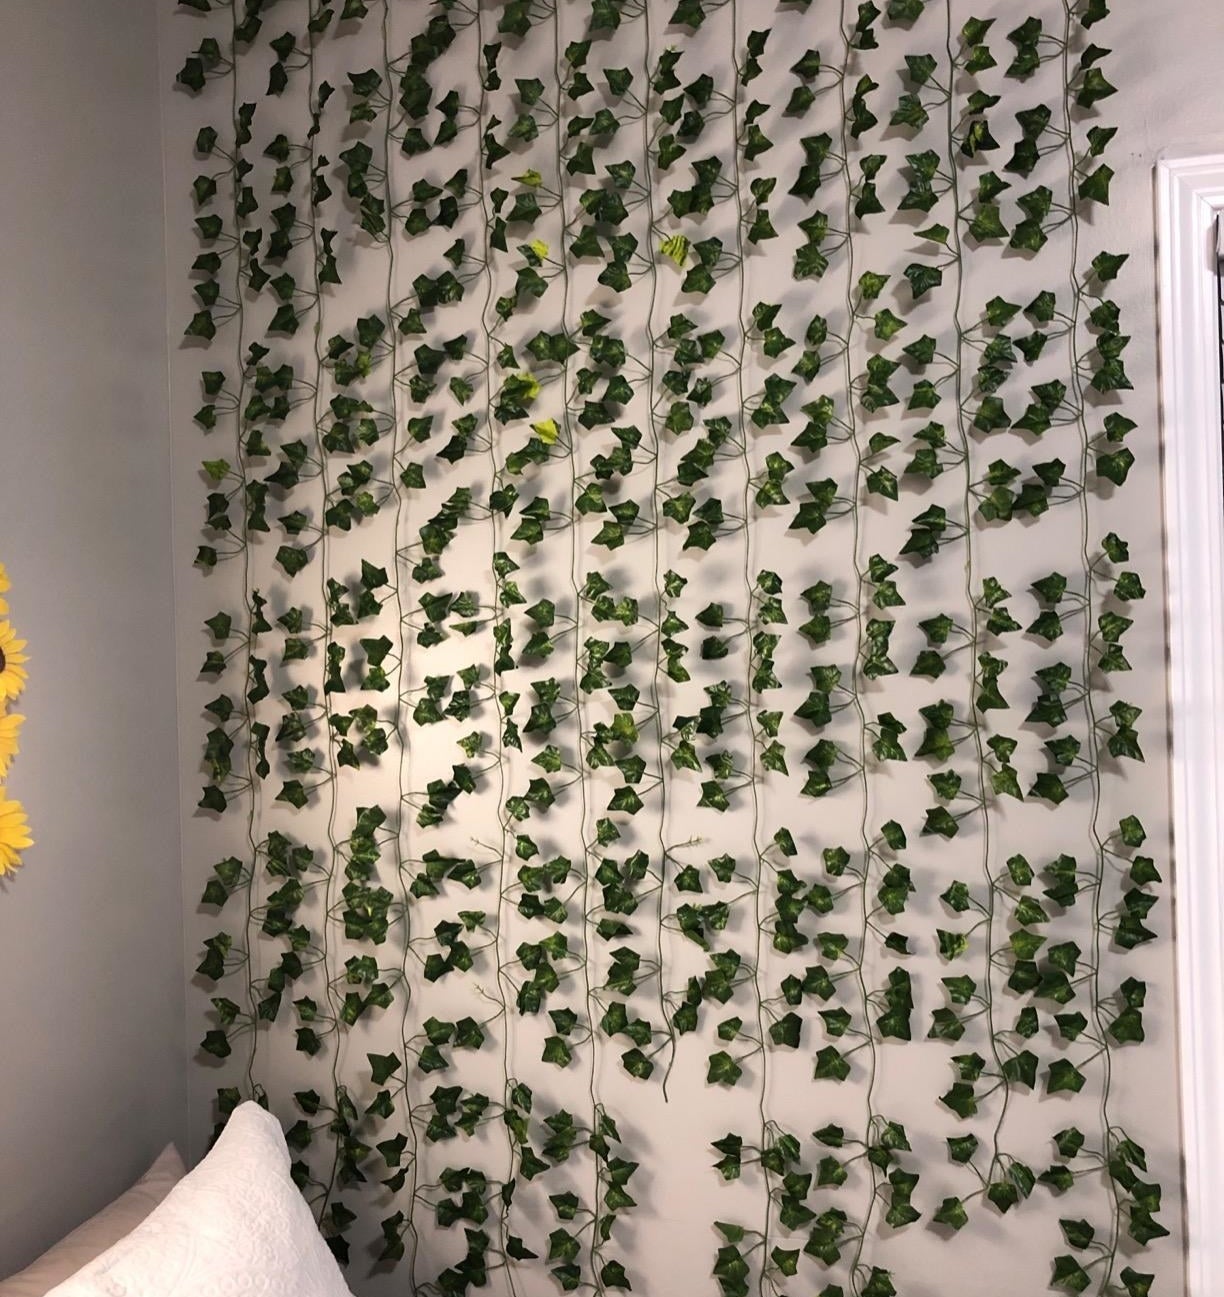 reviewer with the vines hanging on the wall next to their bed 